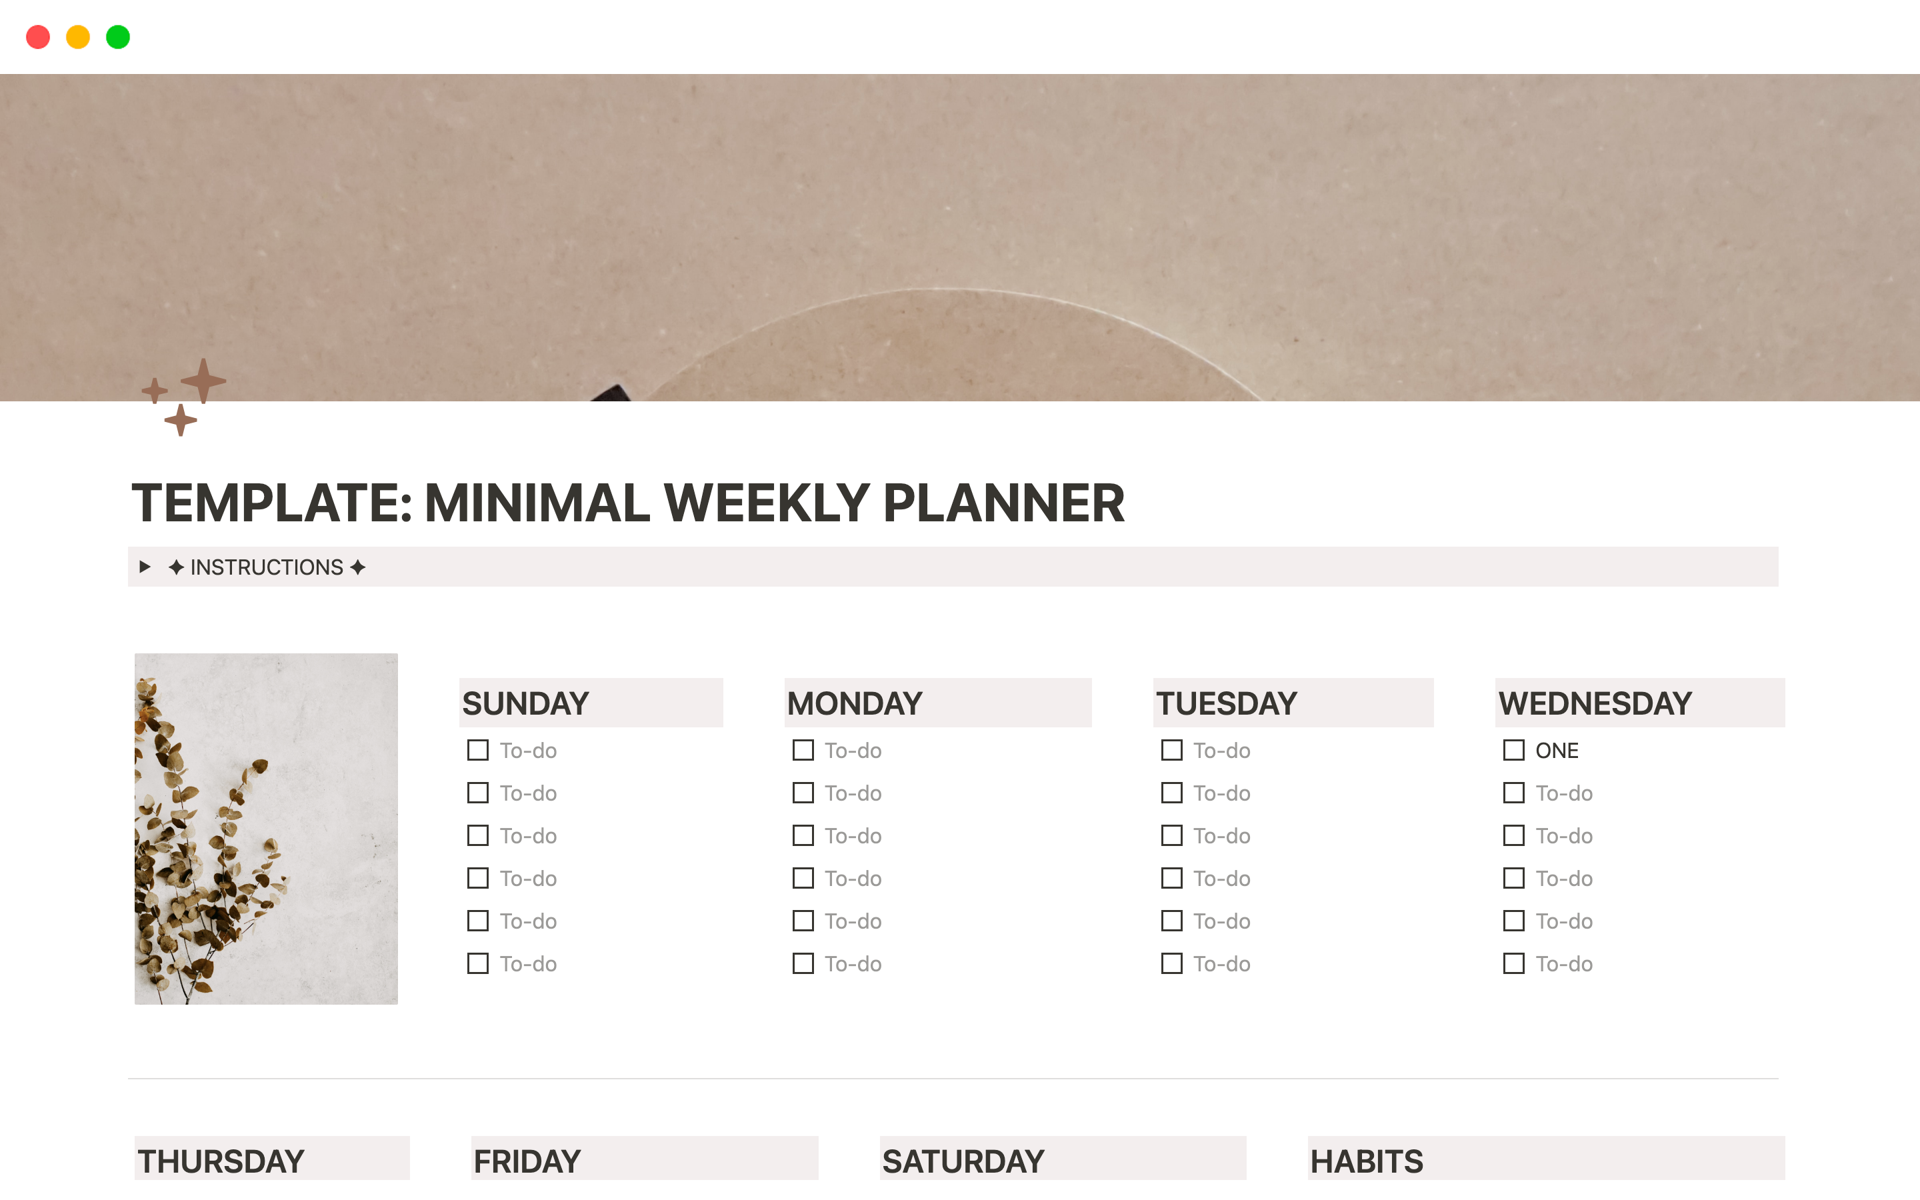 A template preview for MINIMAL WEEKLY PLANNER